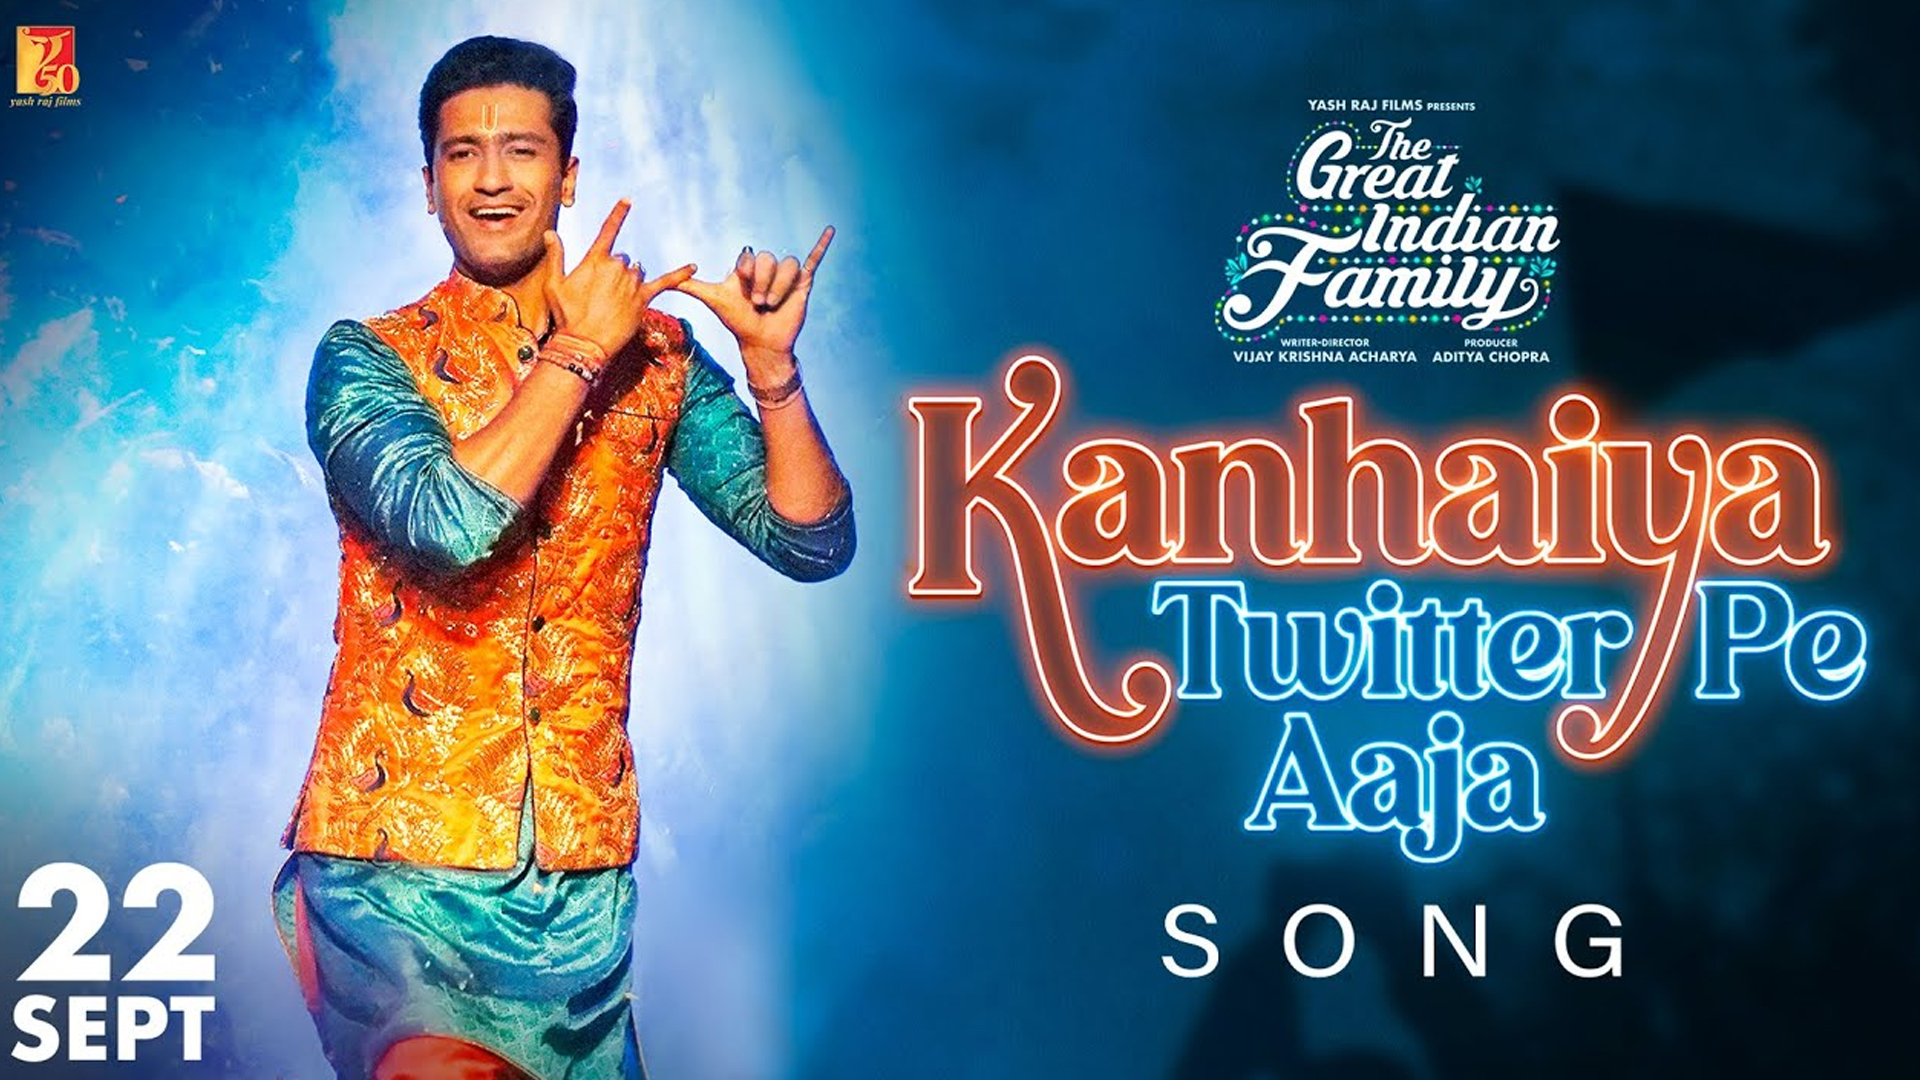 Yash Raj Films Reveals Vicky Kaushal as Singing Sensation Bhajan Kumar in its Upcoming Theatrical Release – The Great Indian Family!